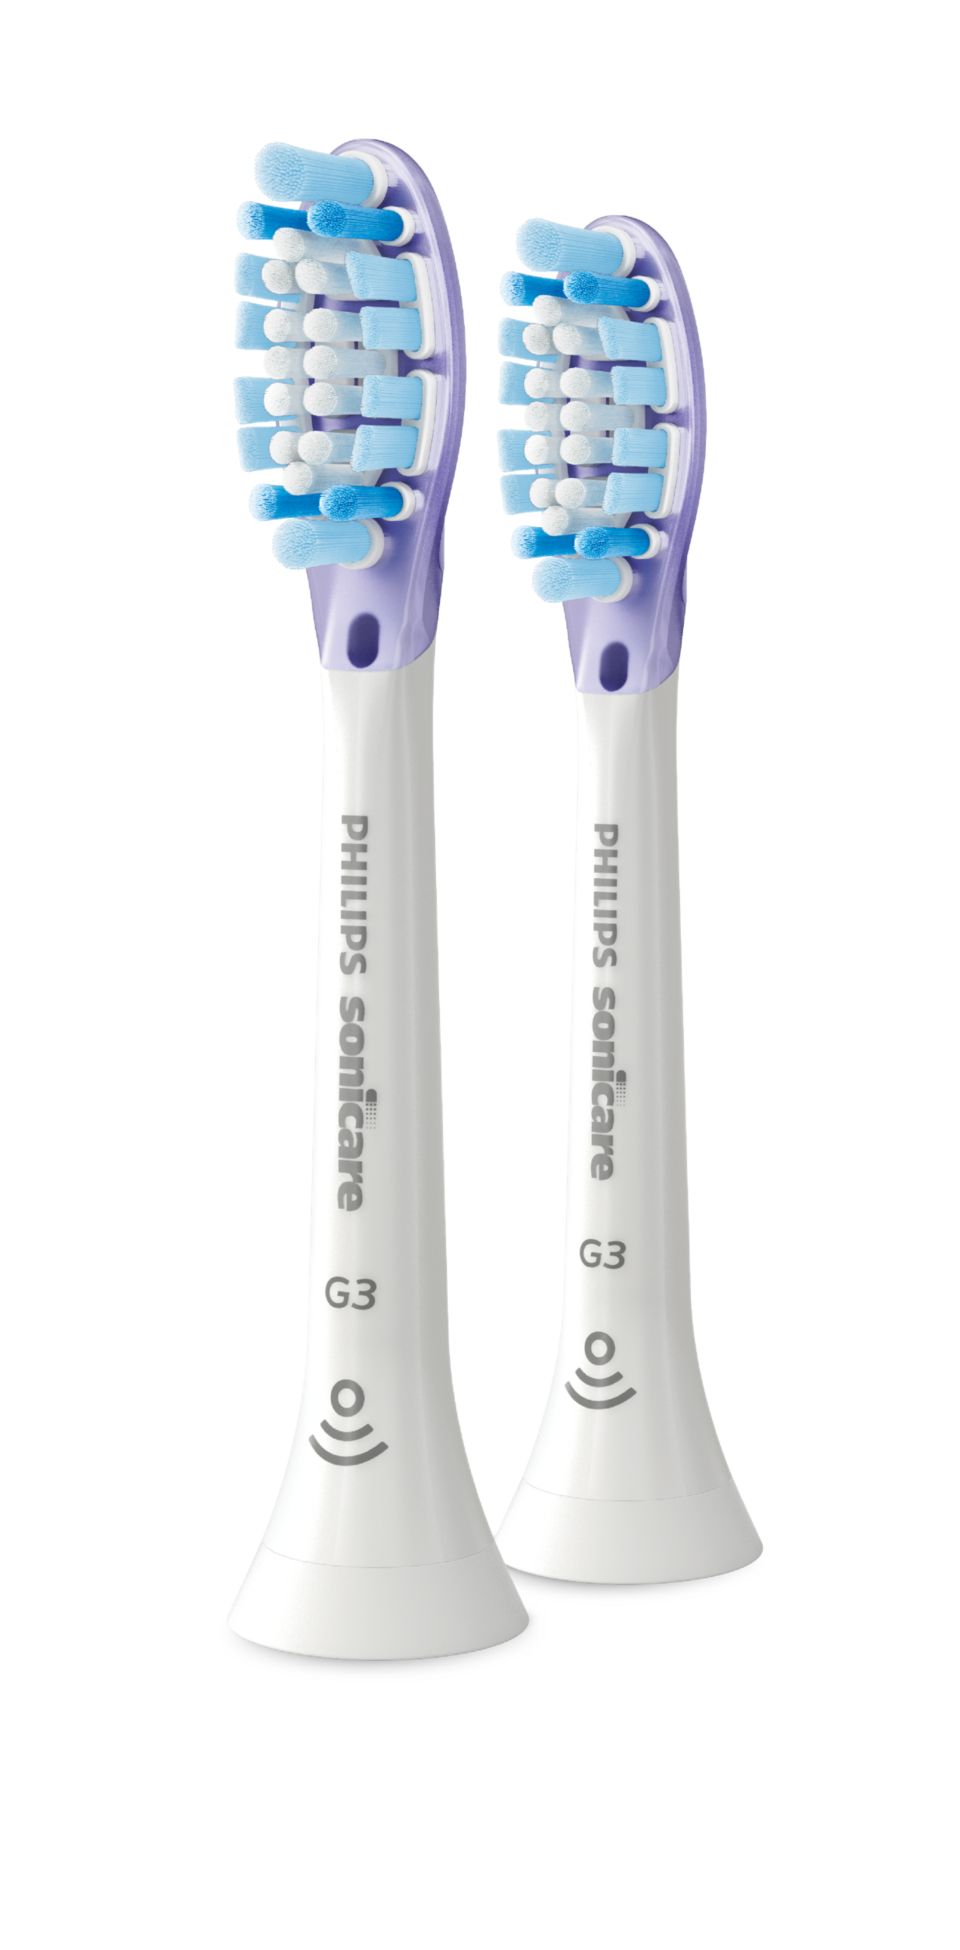 Our best brush head for healthier gums